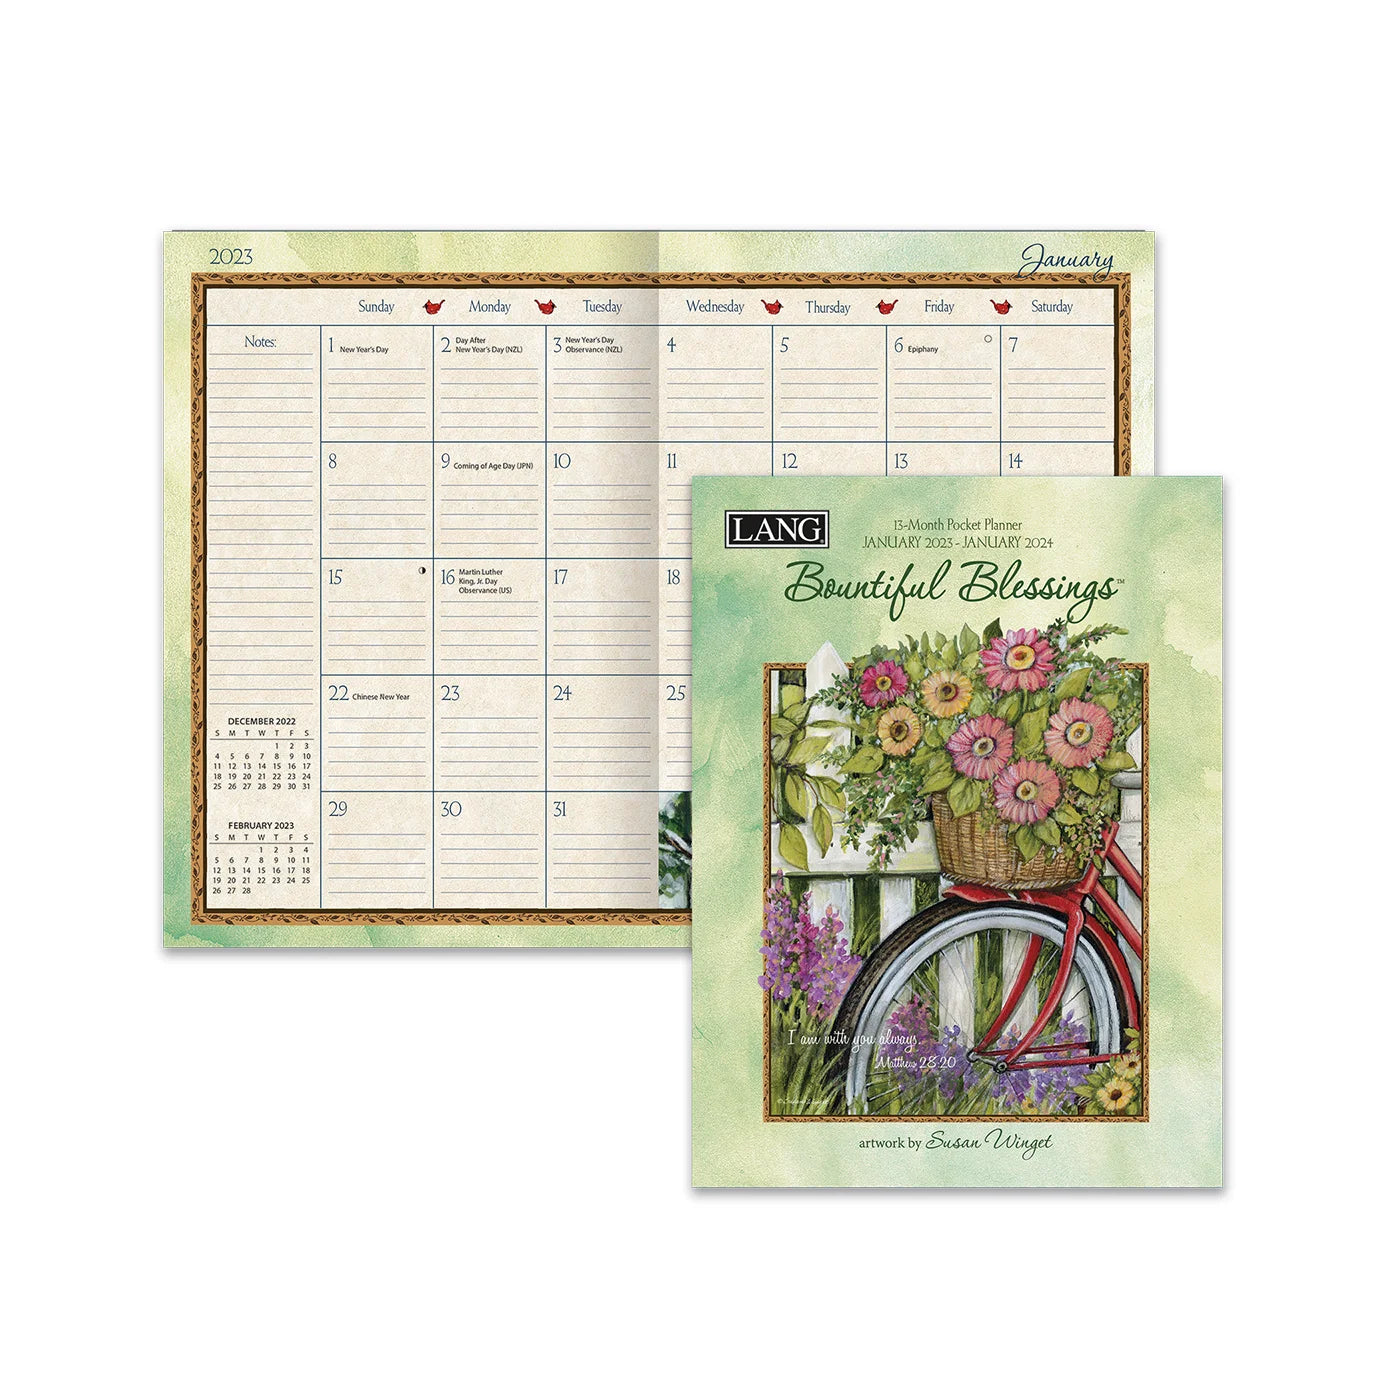 2023 LANG Bountiful Blessings - 13 Month Pocket Diary/Planner